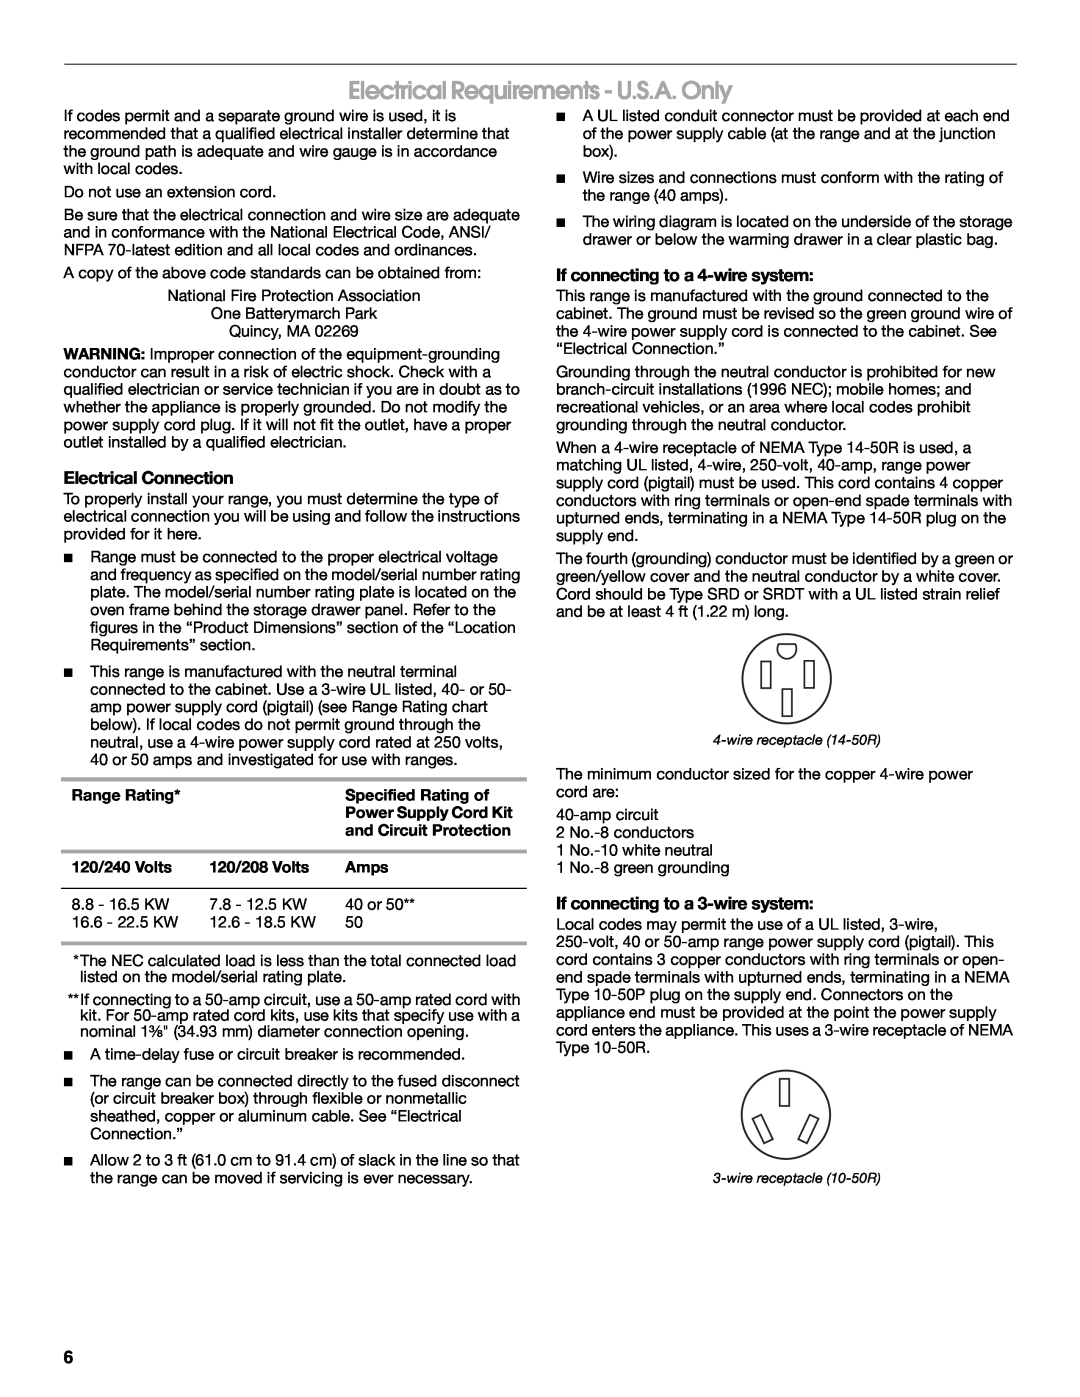 Whirlpool 9762035A Electrical Requirements - U.S.A. Only, Electrical Connection, If connecting to a 4-wire system 